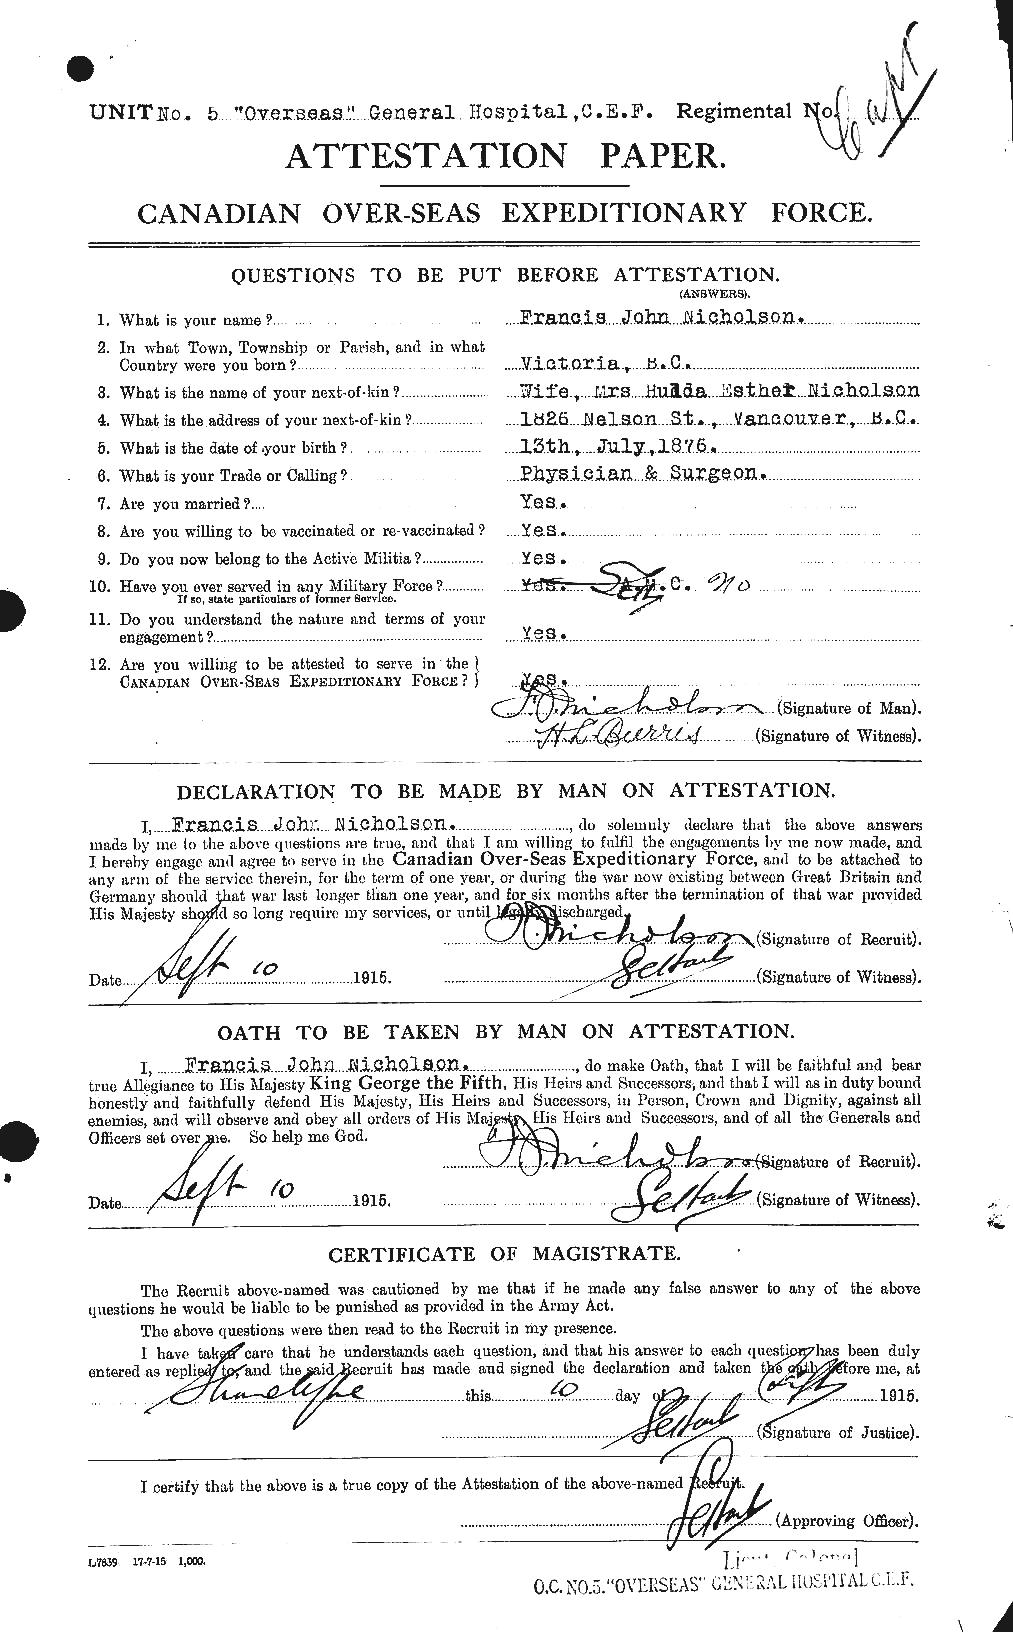 Personnel Records of the First World War - CEF 551193a